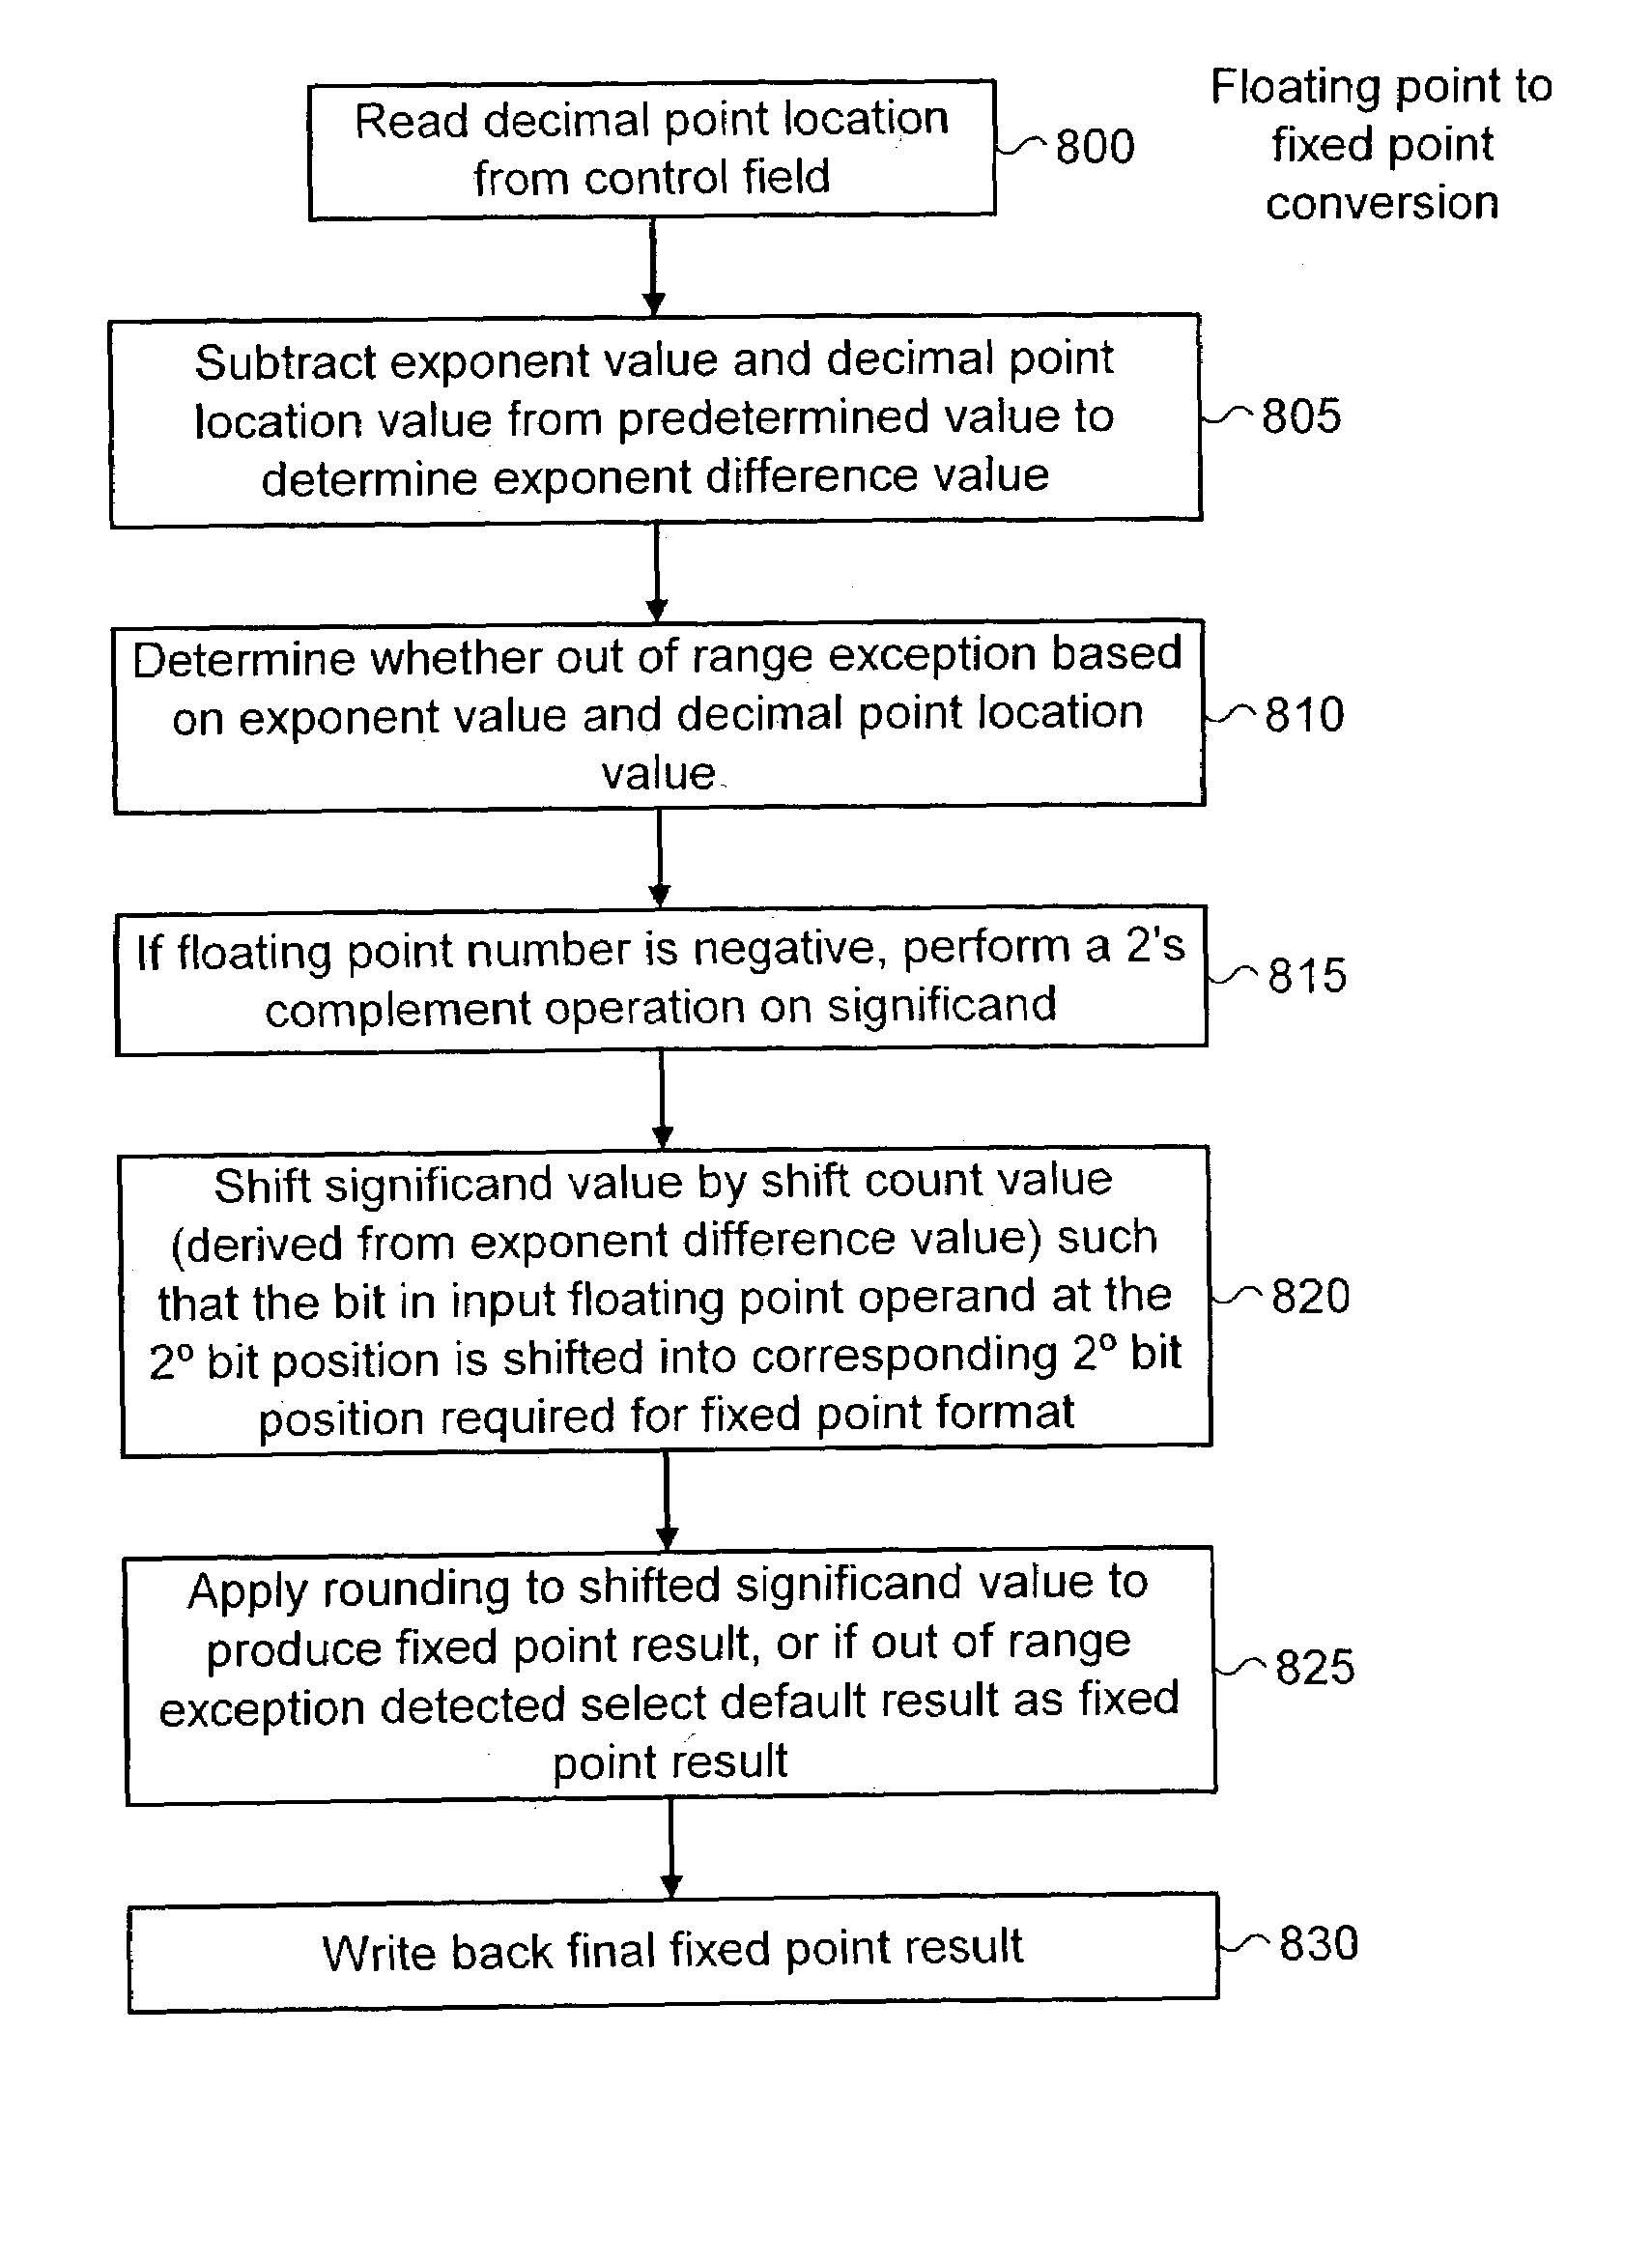 Data processing apparatus and method for converting a number between fixed-point and floating-point representations